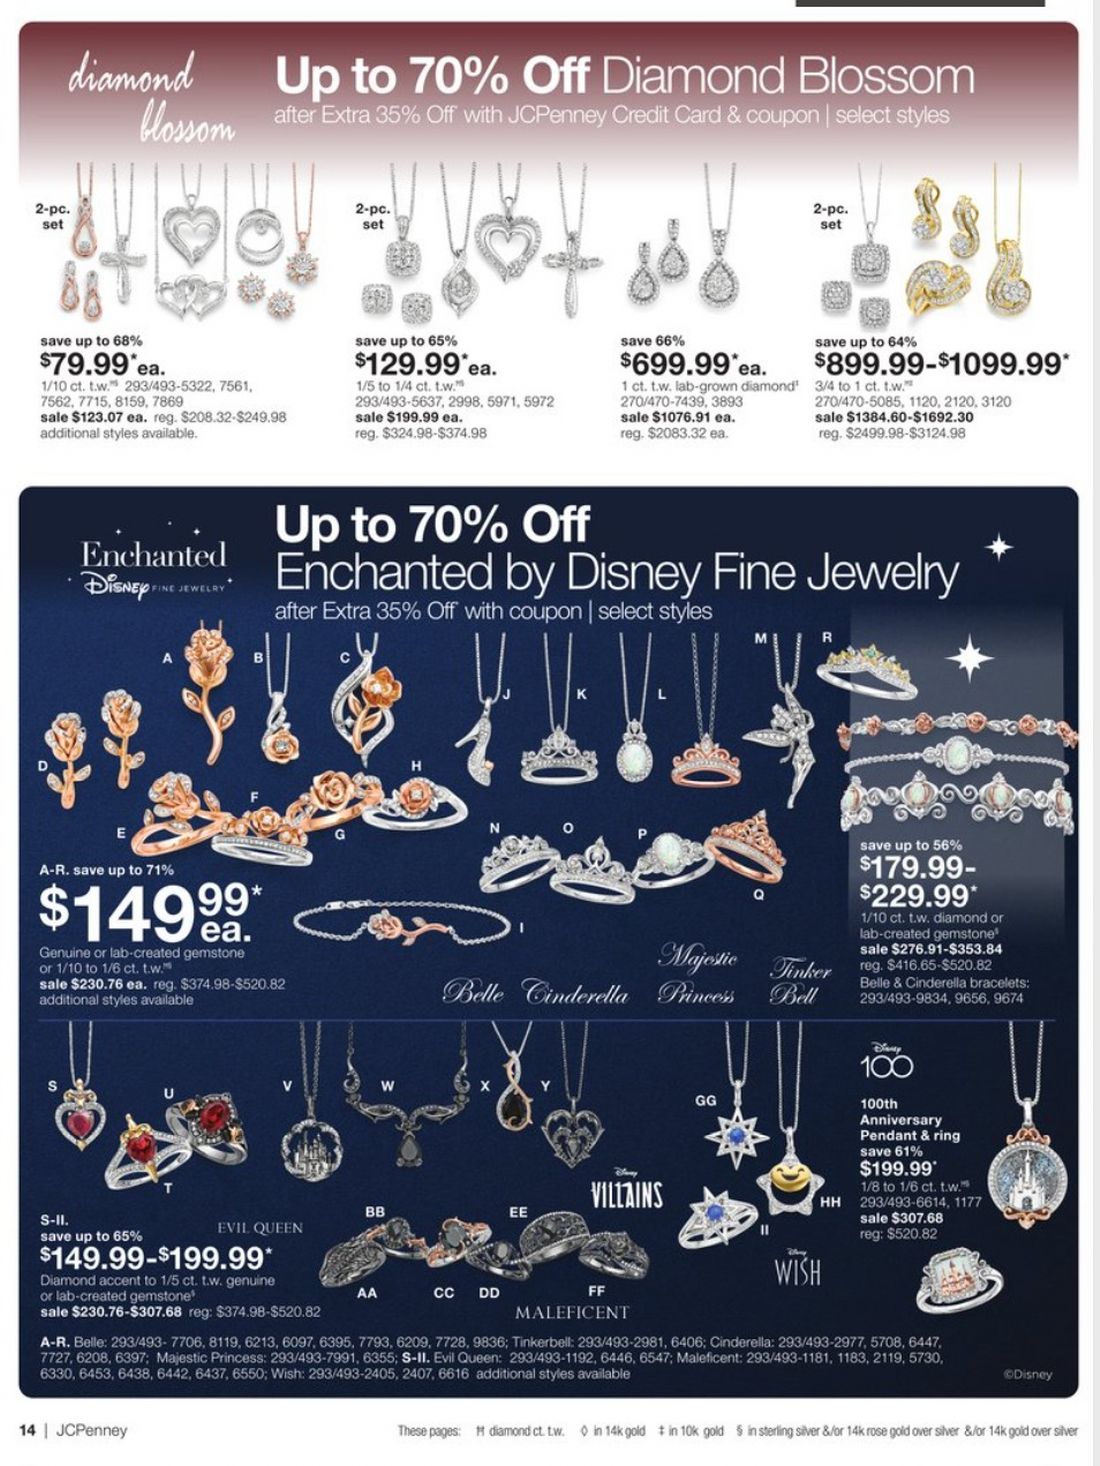 JCPenney Christmas July 2024 Weekly Sales, Deals, Discounts and Digital Coupons.